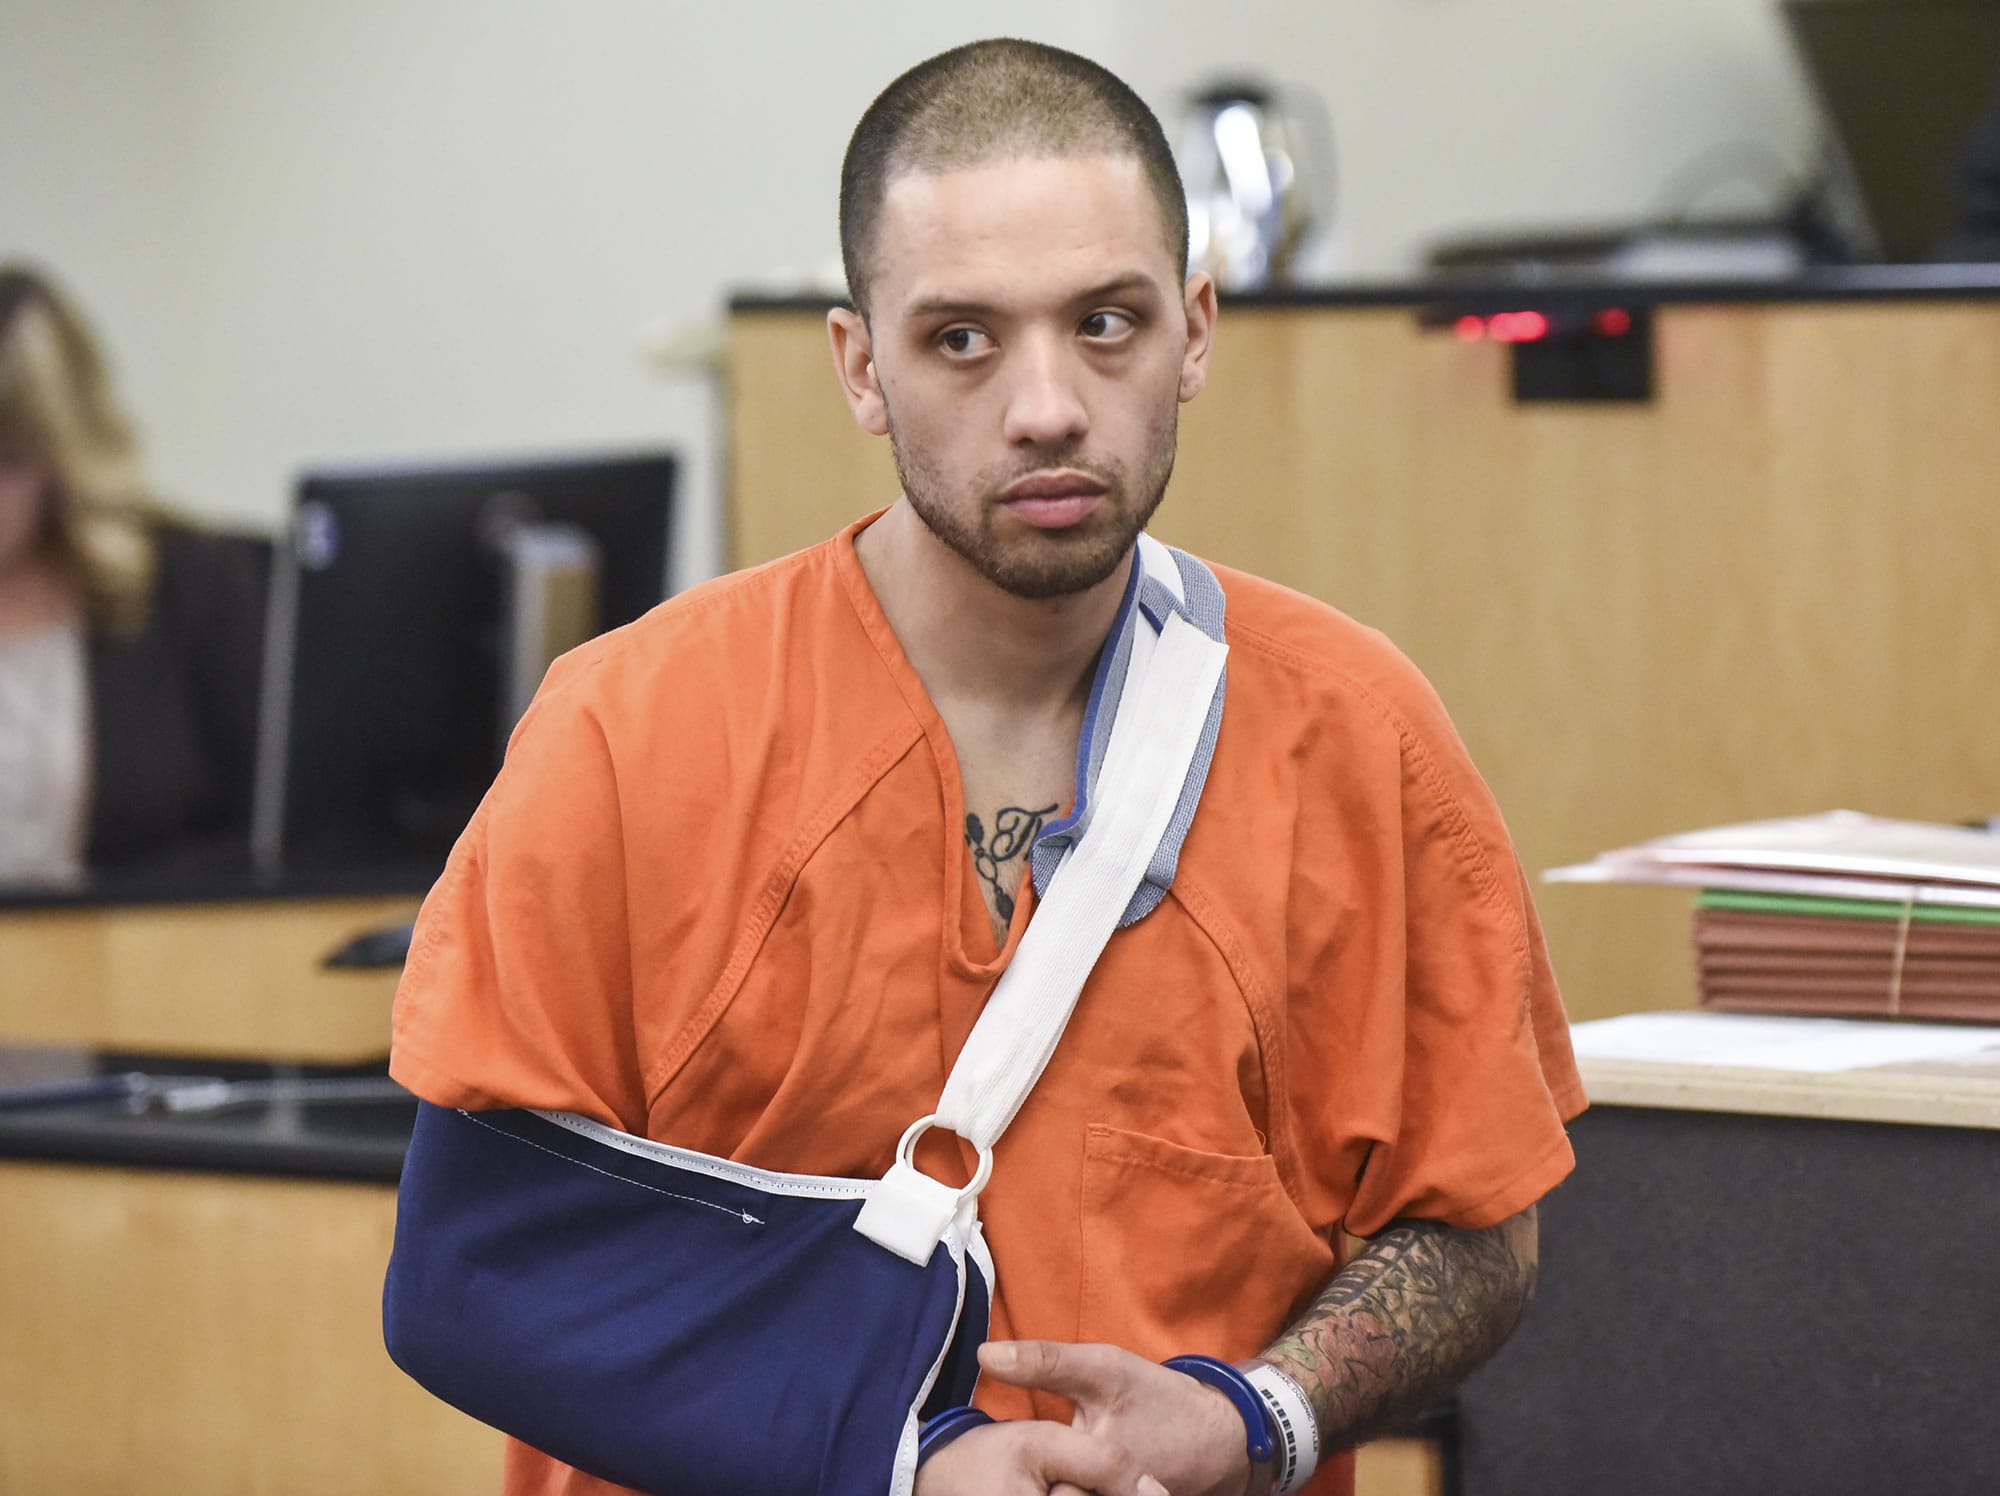 Dominic Tovar, the suspect in Saturday's officer-involved shooting, appears in Clark County Superior Court on Wednesday morning, March 1, 2017.